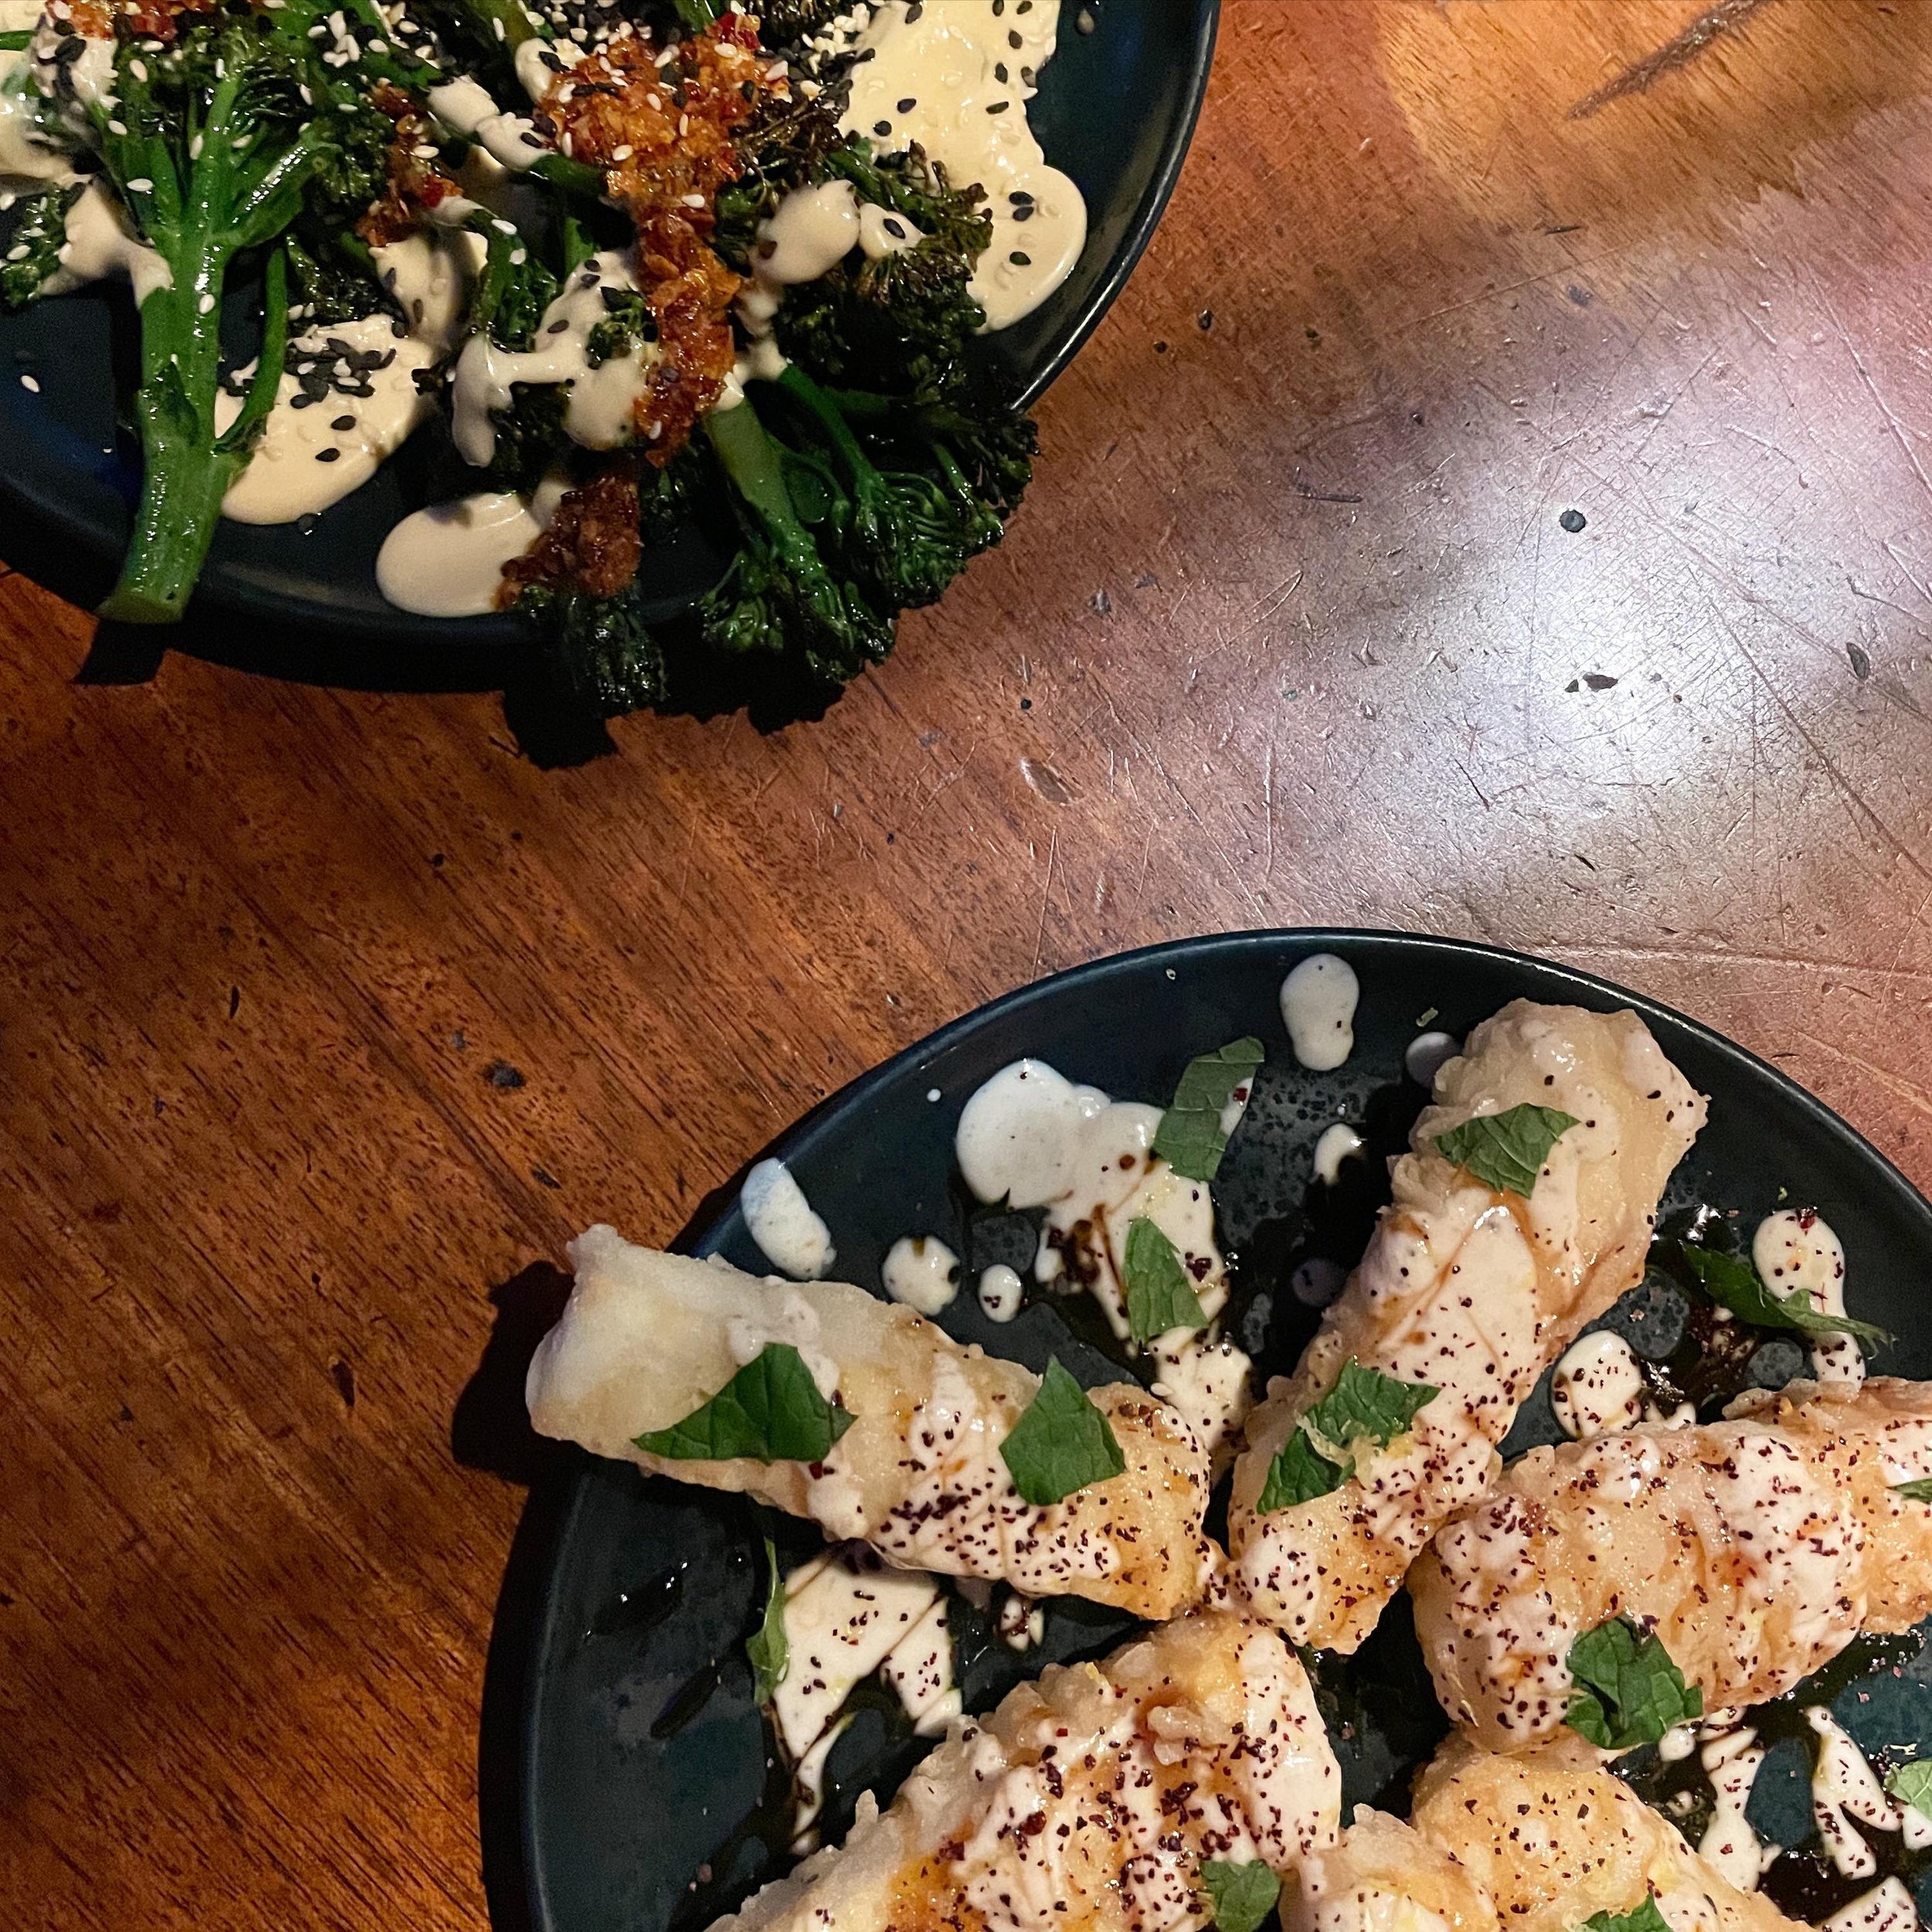 Tag a friend you want to share an appetizer with ❤️ 

Open 4pm to 9pm until Monday! Walk-in or take-out &mdash; call 902-224-3888 for orders